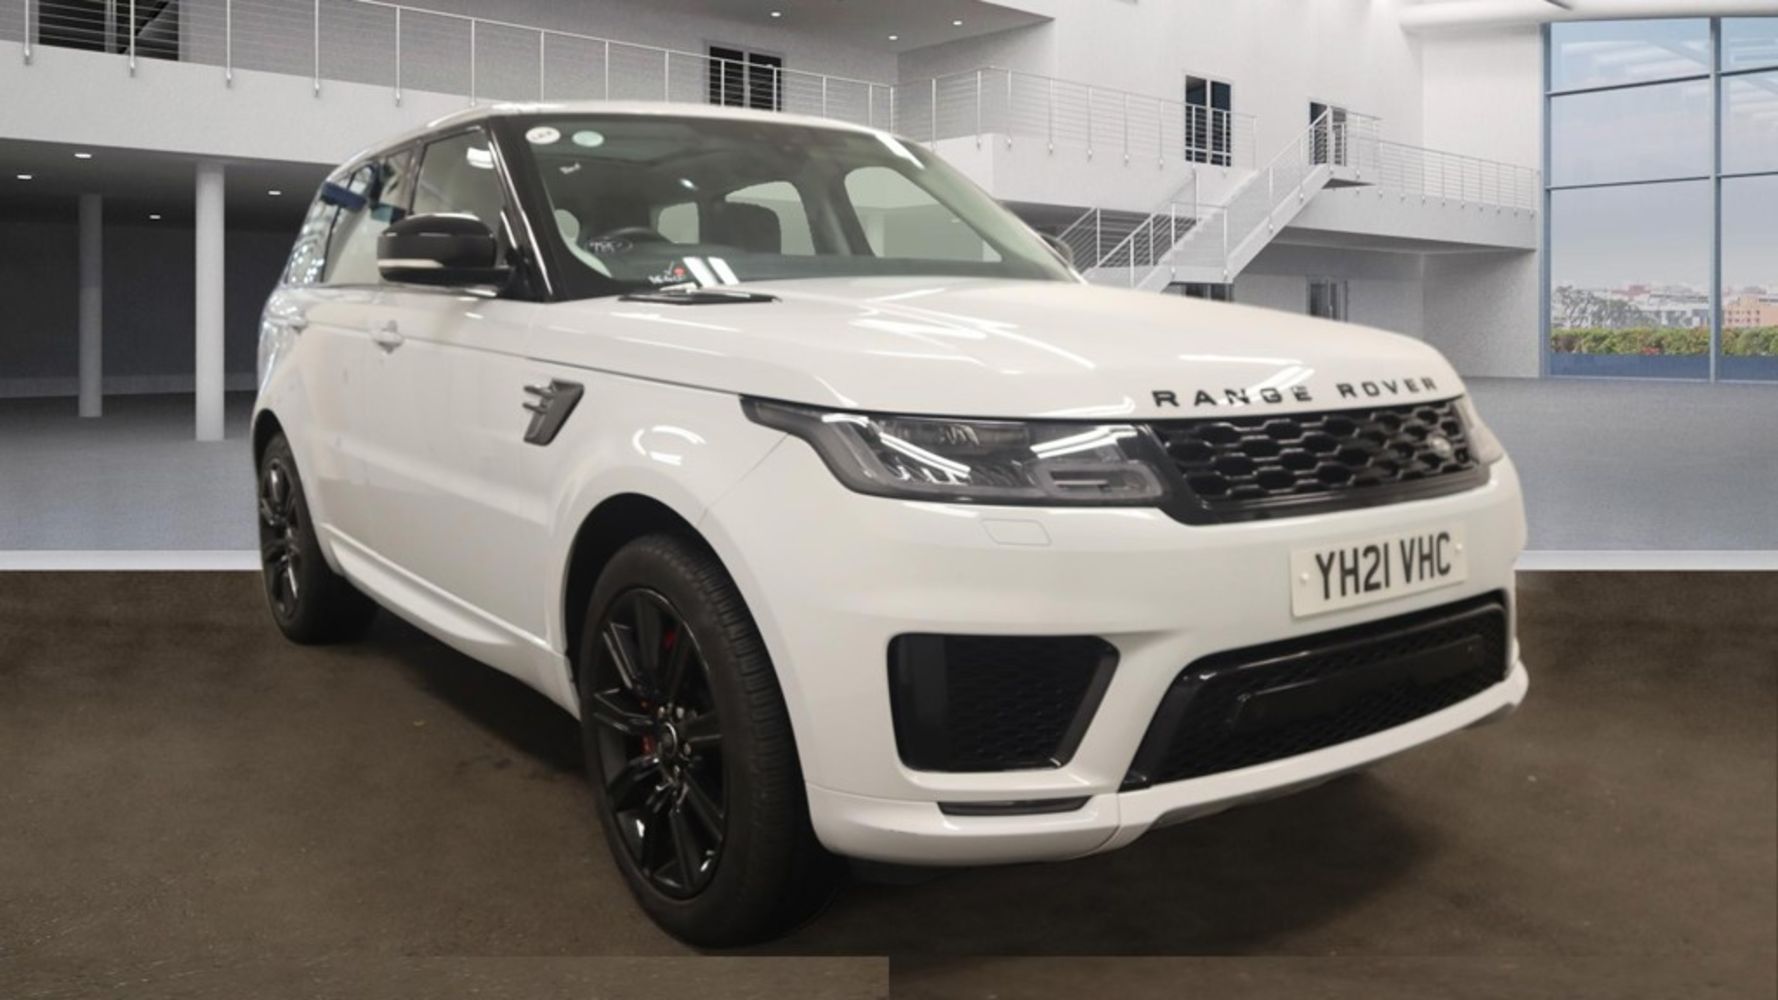 ** Commercial Vehicle & Car Event ** Range Rover Sport HSE Dynamic 2021 '21 Reg' - Mercedes Benz Vito 119 CDI 2019 '19 Reg' - Over 20+ Lots 